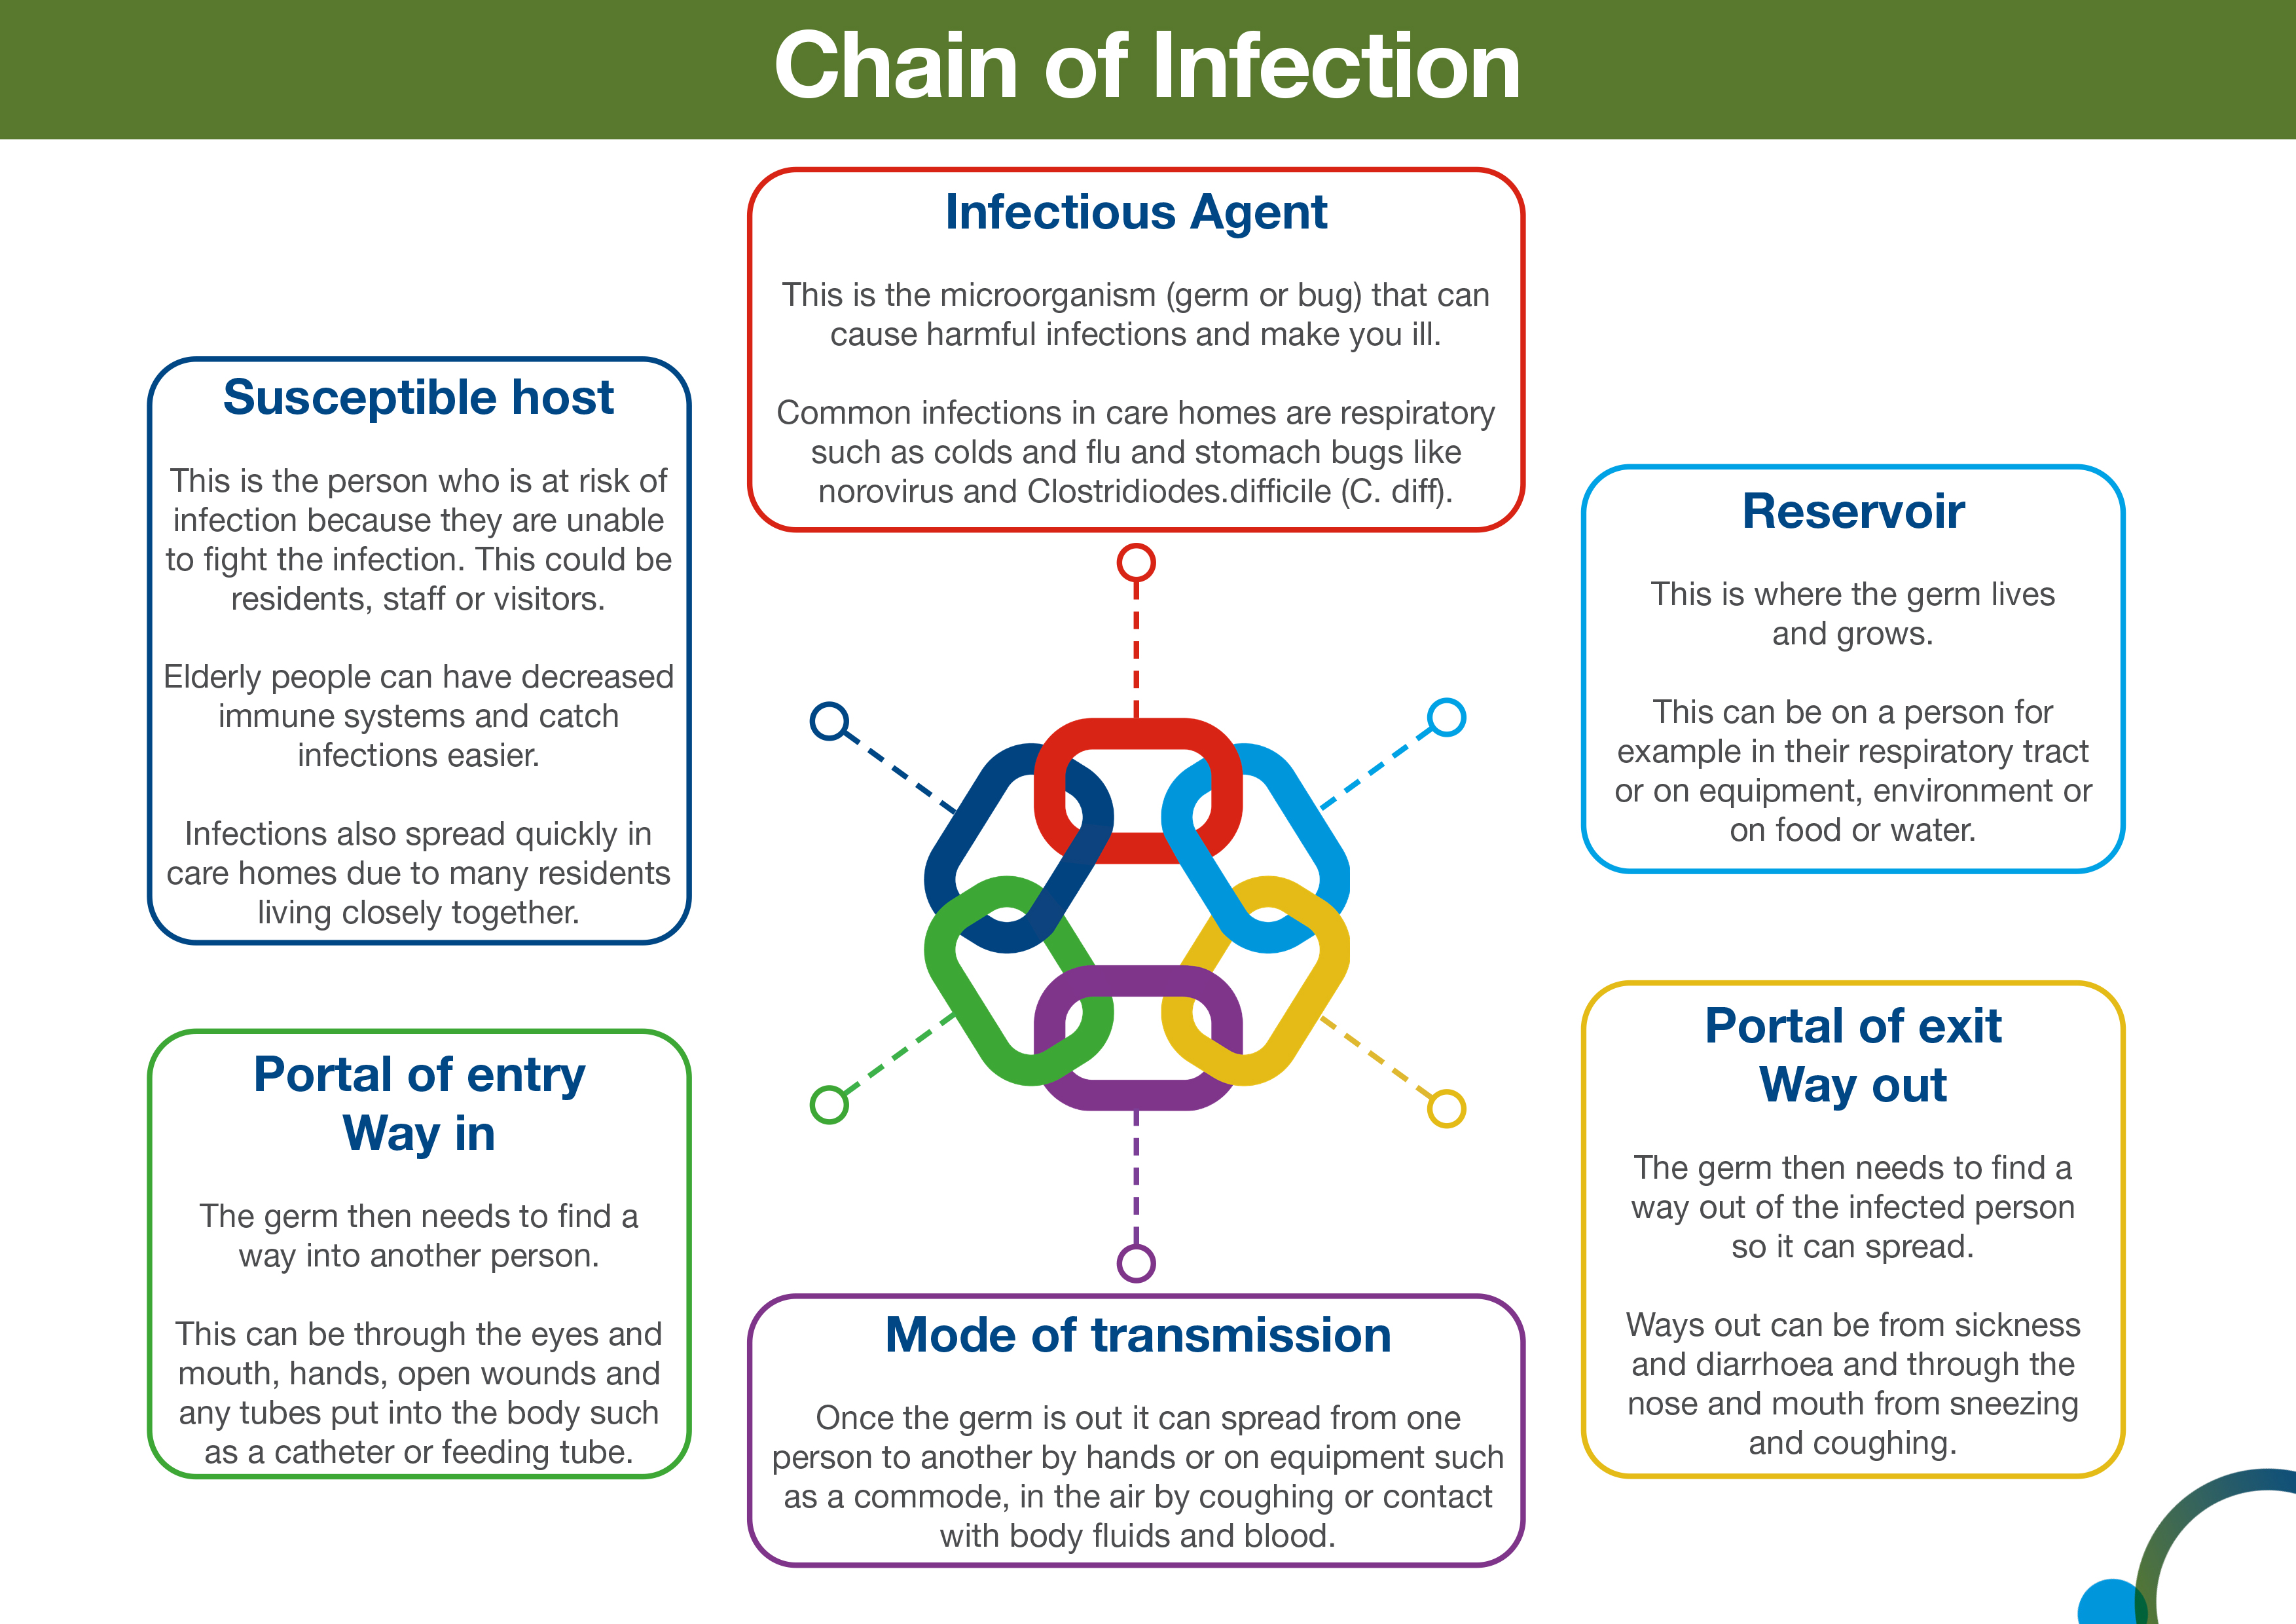 Chain of infection diagram alt text
This diagram shows the 6 different links of the chain of infection.  A diagram showing 6 links of a chain interlinked is in the middle of the diagram with the 6 boxes around it. Here is the description of the 6 boxes. 
Infectious agent: This is the microorganism or bug that can cause harmful infections and make you ill.  Common infections in care homes are respiratory such as cold and flu and stomach bugs like norovirus and clostridiodes difficile (C.diff) 
Reservoir: This is where the germ lives and grows.  This can be on a person for example in their respiratory tract or equipment, environment or on food and water.,
Portal of exit.  Way out: The germ then needs to find a way out of the infected person and then to spread. Ways out can be from sickness and diarrhoea and through the nose and mouth from coughing and sneezing. 
Mode of transmission:  Once the germ is out it can spread from one person to another by hands or on equipment such as a commode, in the air by coughing or contact with blood and body fluids.
Portal of entry. Way in: The germ then needs to find its way into another person.  This can be through the eyes or mouth, hands, open wounds or any tubes that go into the body such as a catheter or feeding tube. 
Susceptible host: This is the person who is at risk of infection as they are unable to fight the infection.  This could be residents, staff or visitors.  Elderly people can have a decreased immune system and catch infections easier. Infections also spread quickly in care homes due to many residents living together. 
 